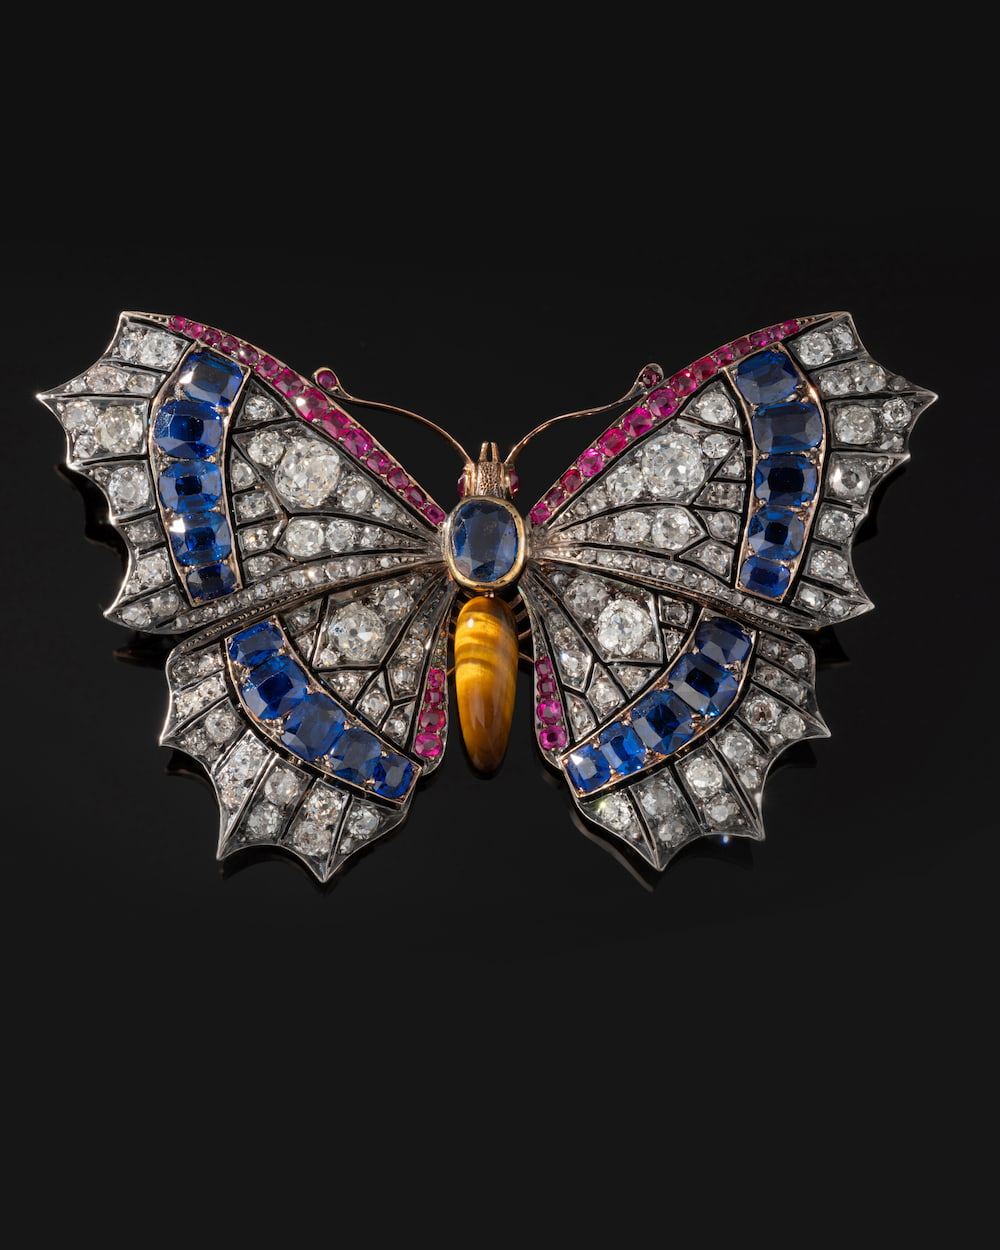 Important Butterfly brooch set with rubies, sapphires and diamonds 19th century.